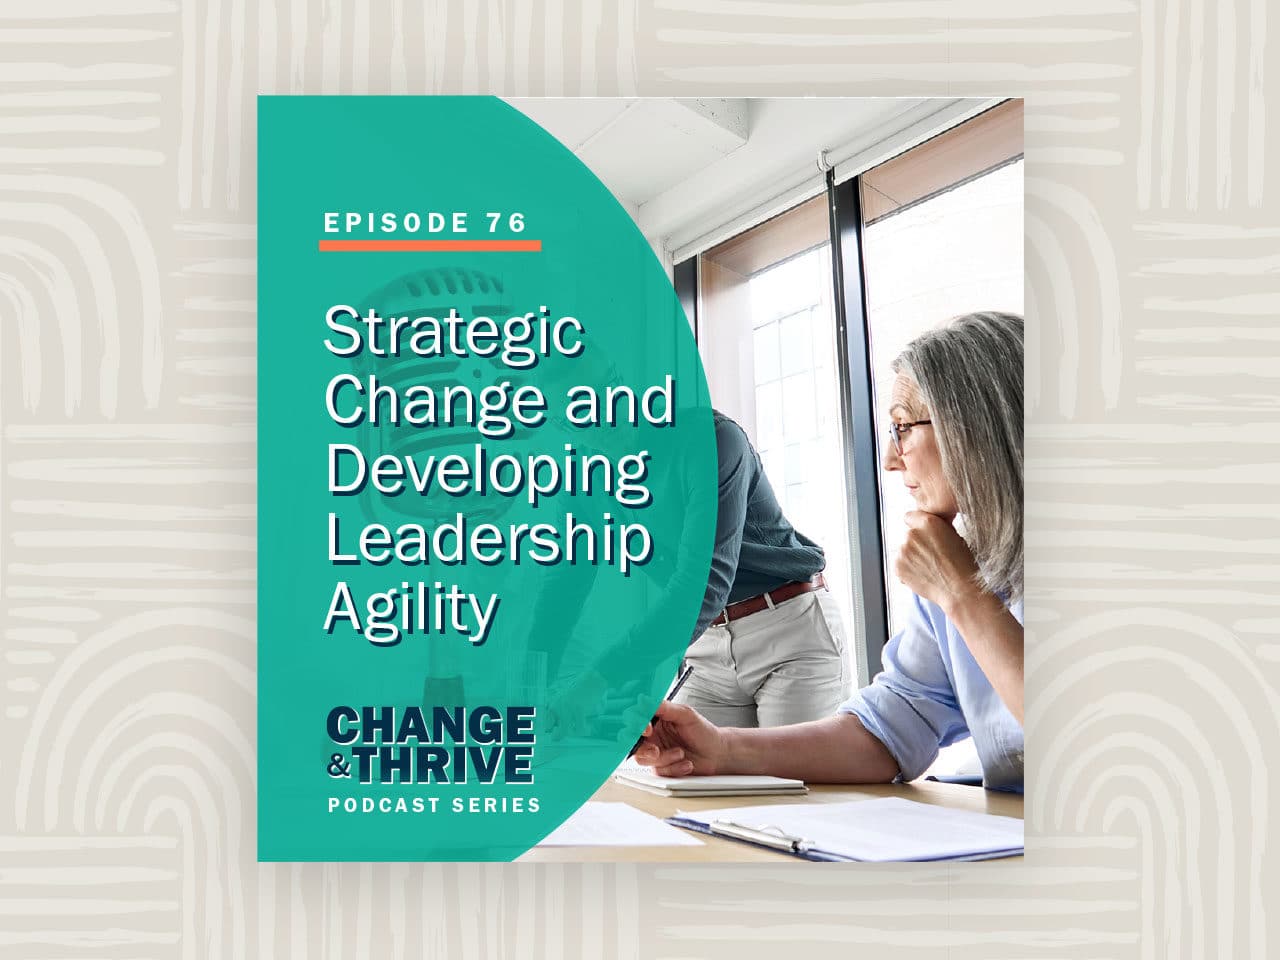 Strategic Change and Developing Leadership Agility